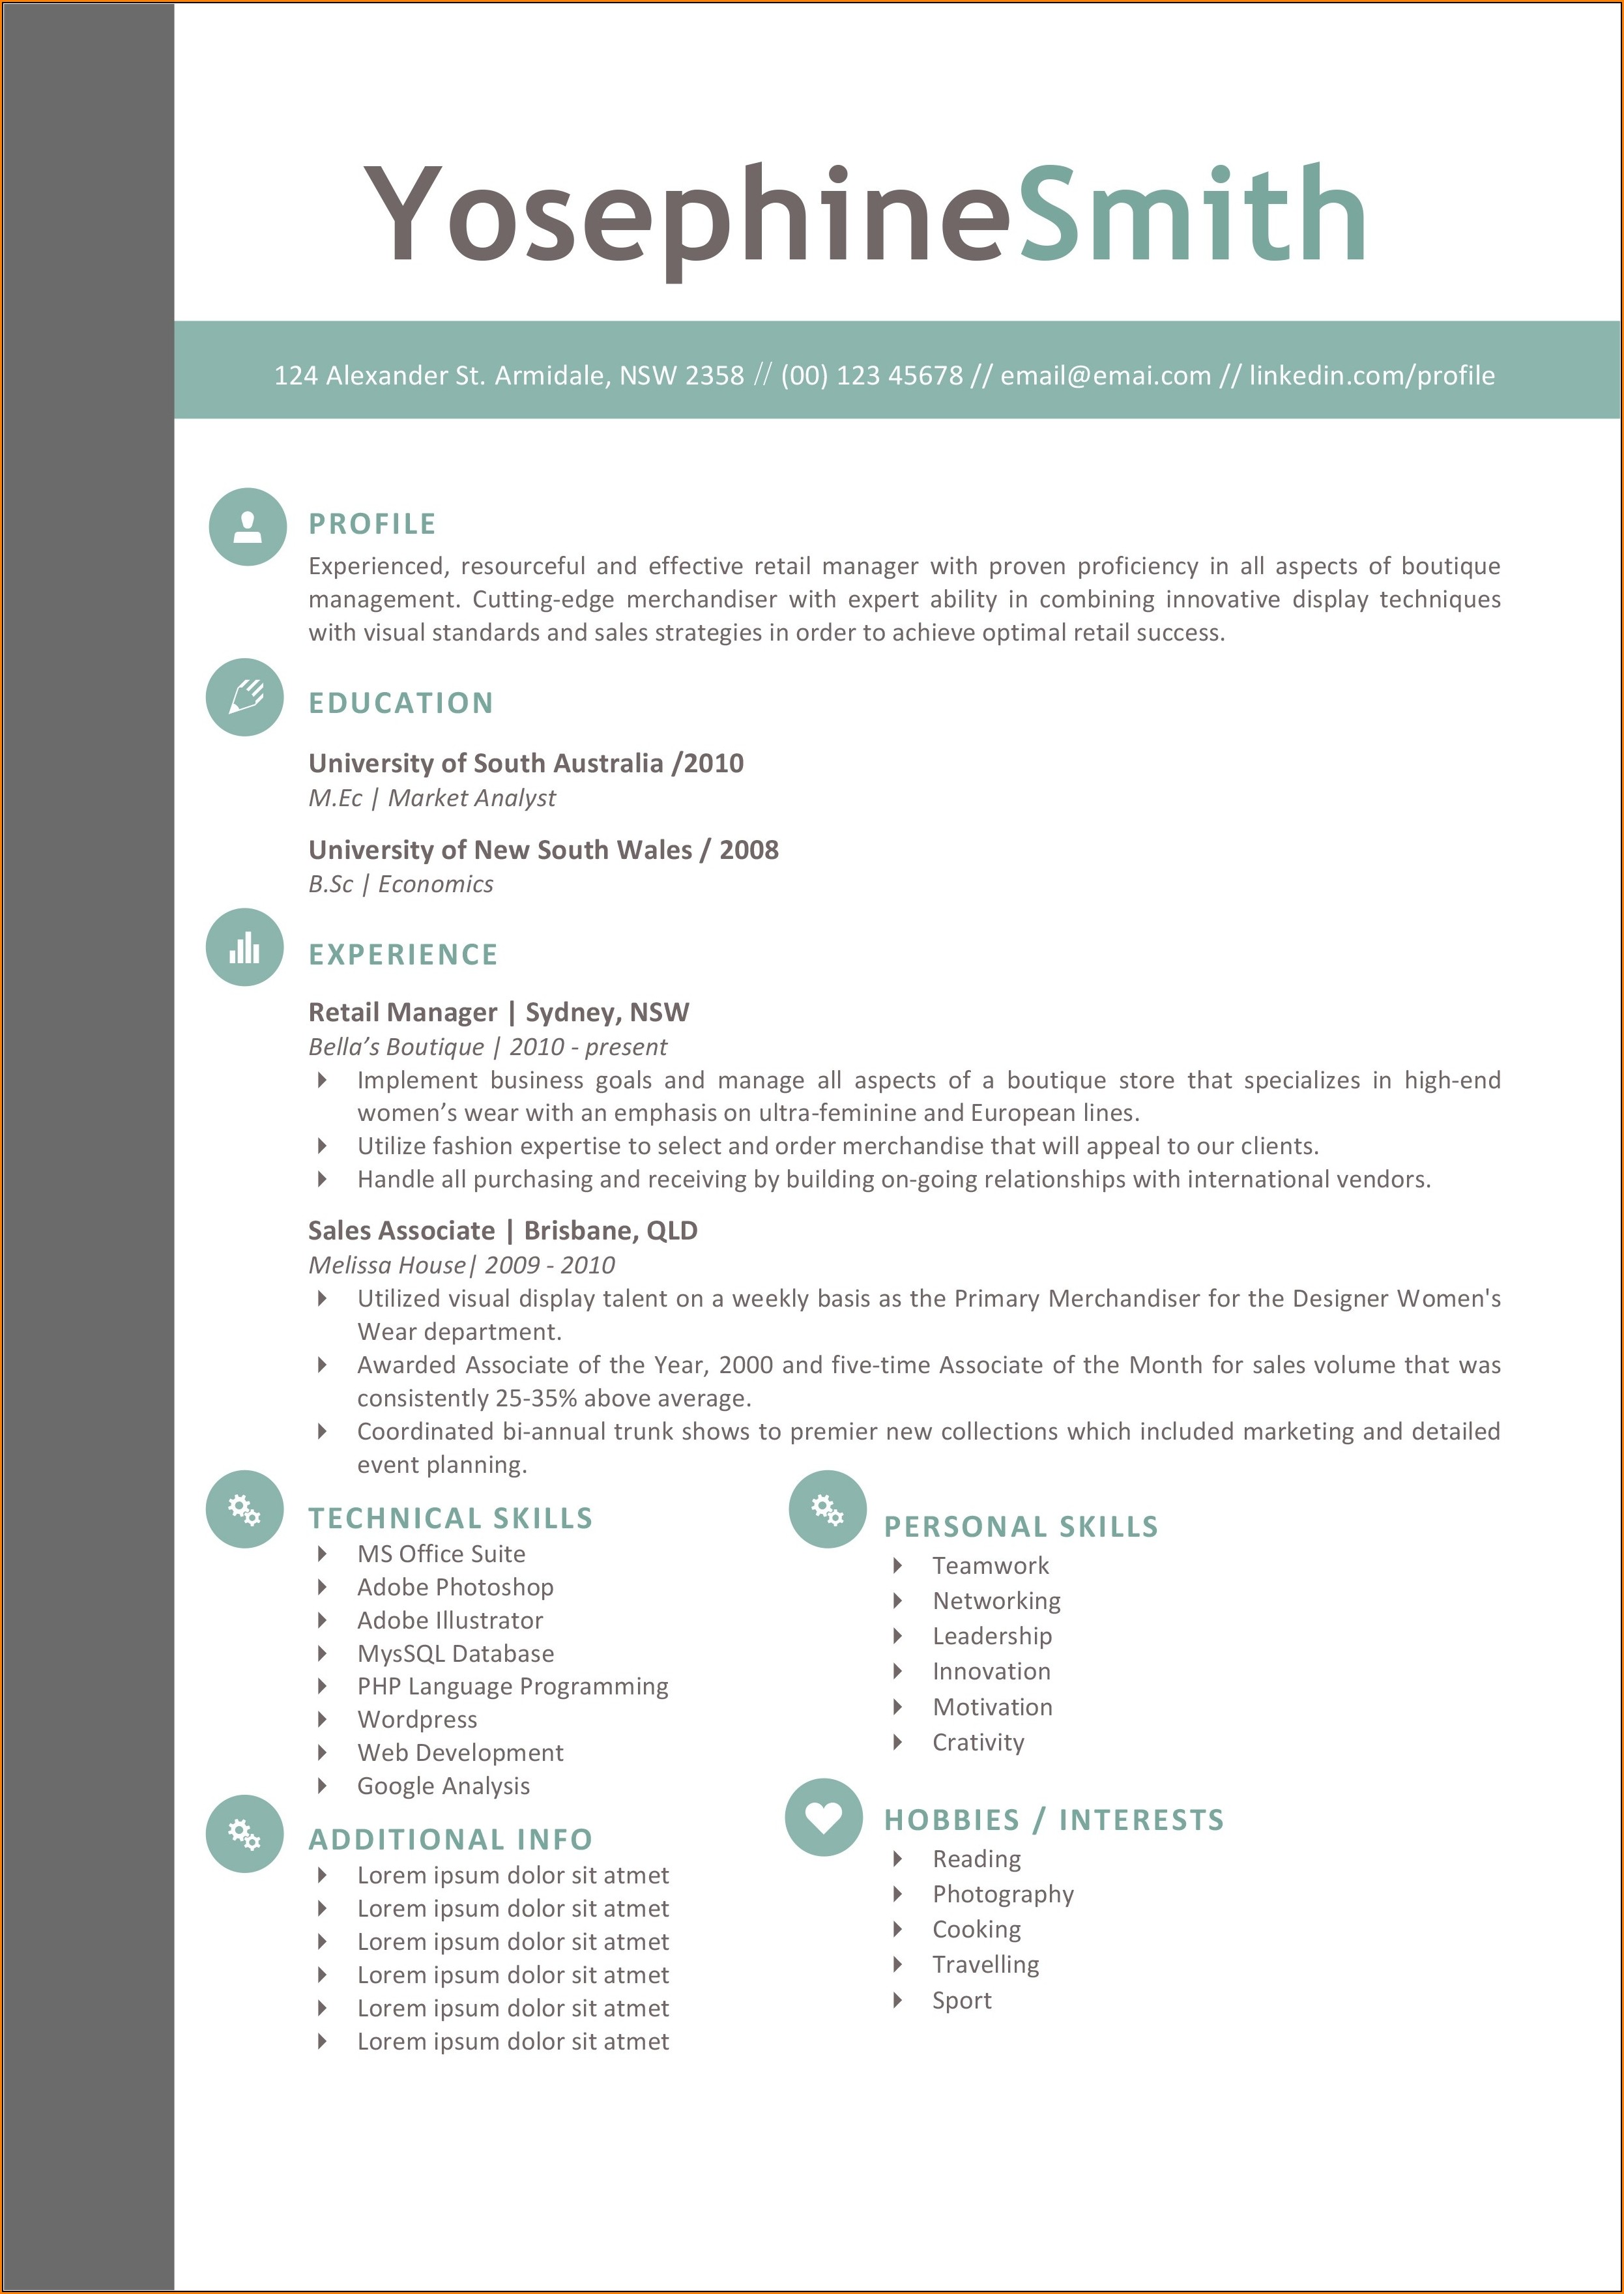 Creative Resume Templates Free Download For Microsoft Word